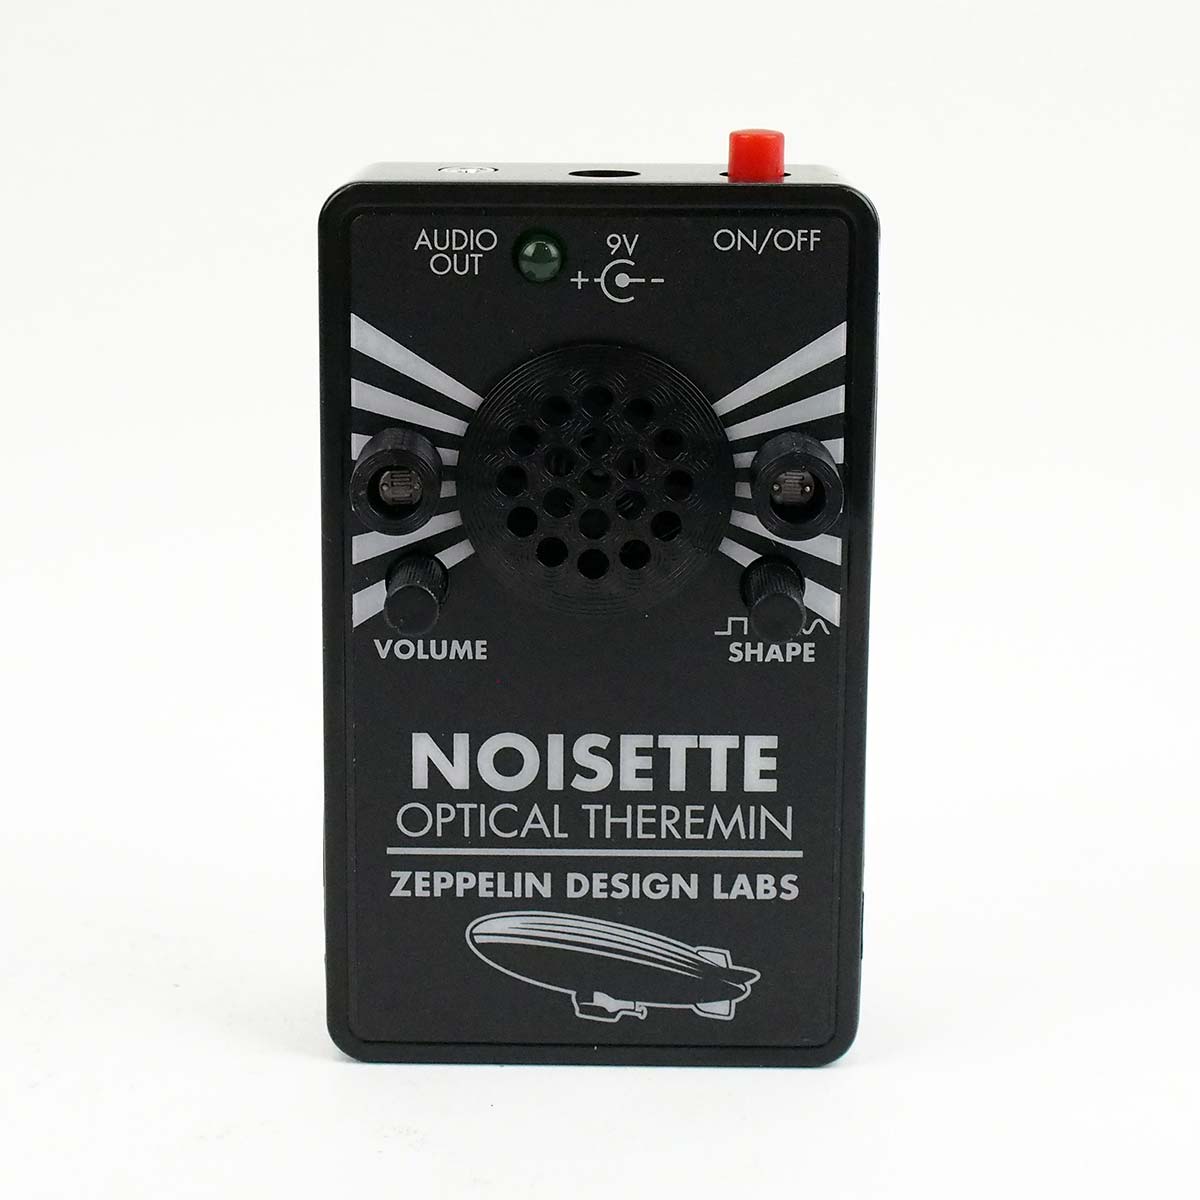 Zeppelin Design Labs Releases The Noisette Optical Theremin